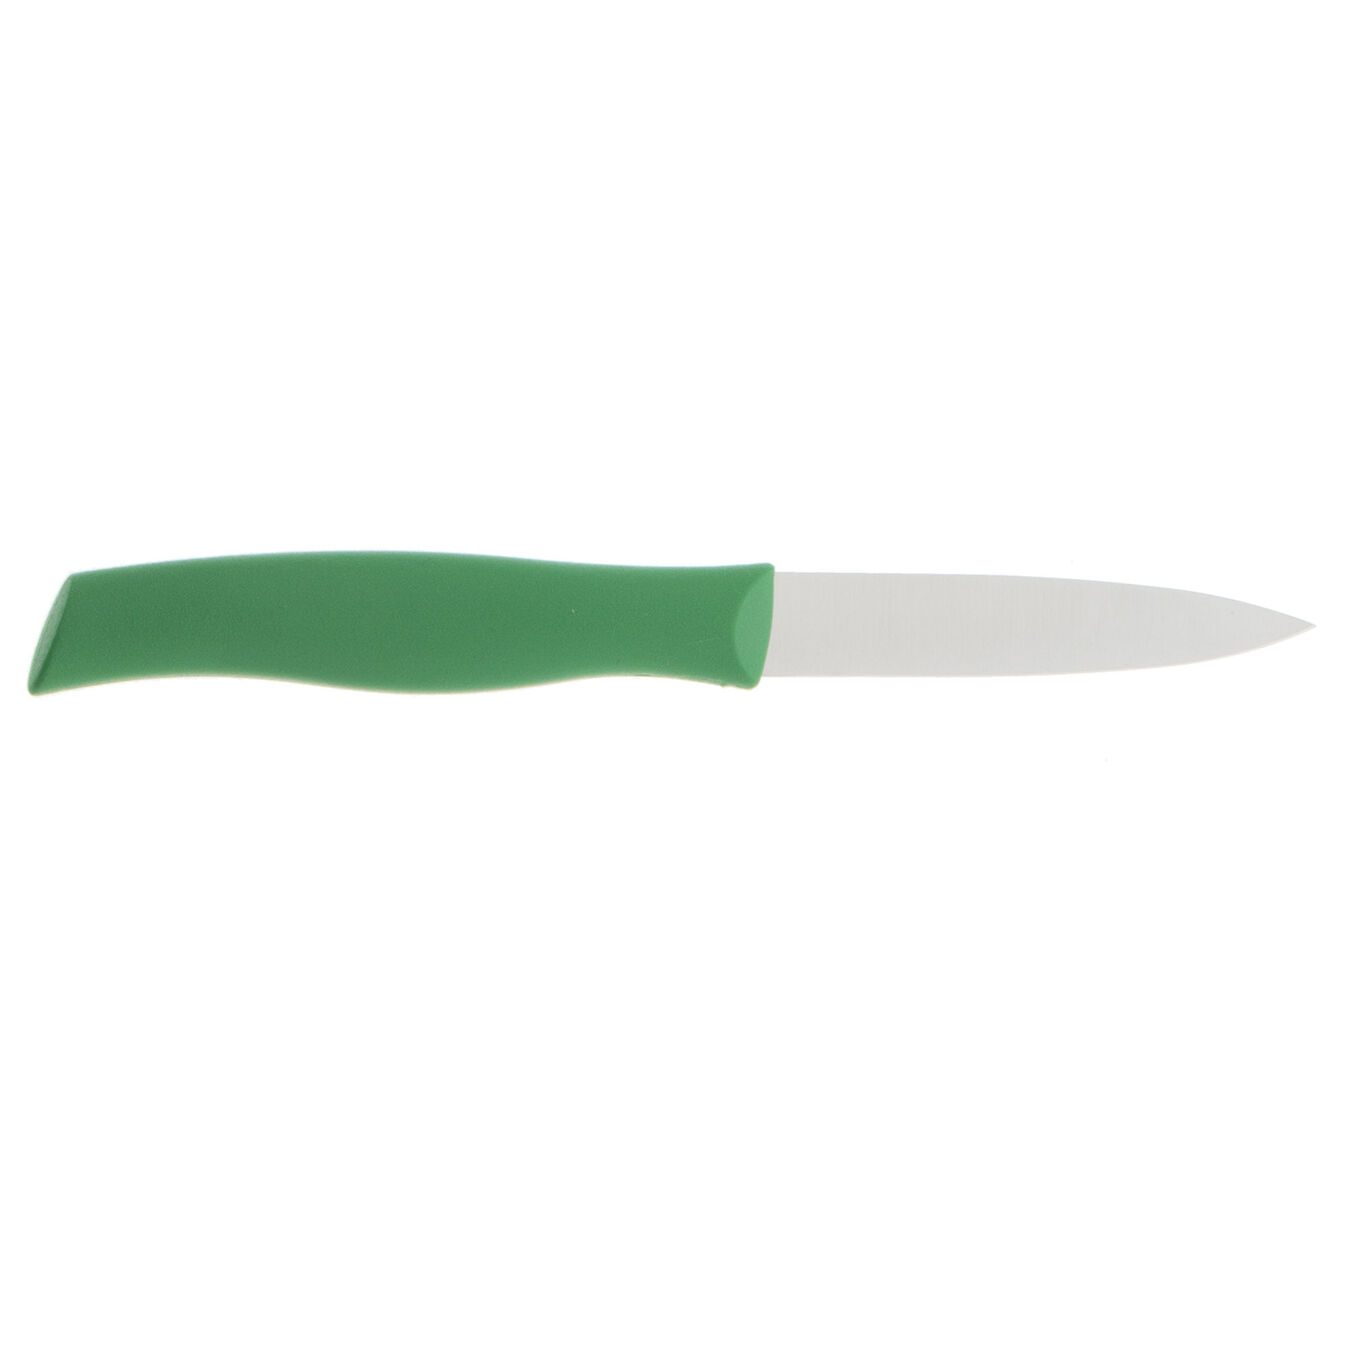 3.5-inch, Paring Knife Green,,large 2